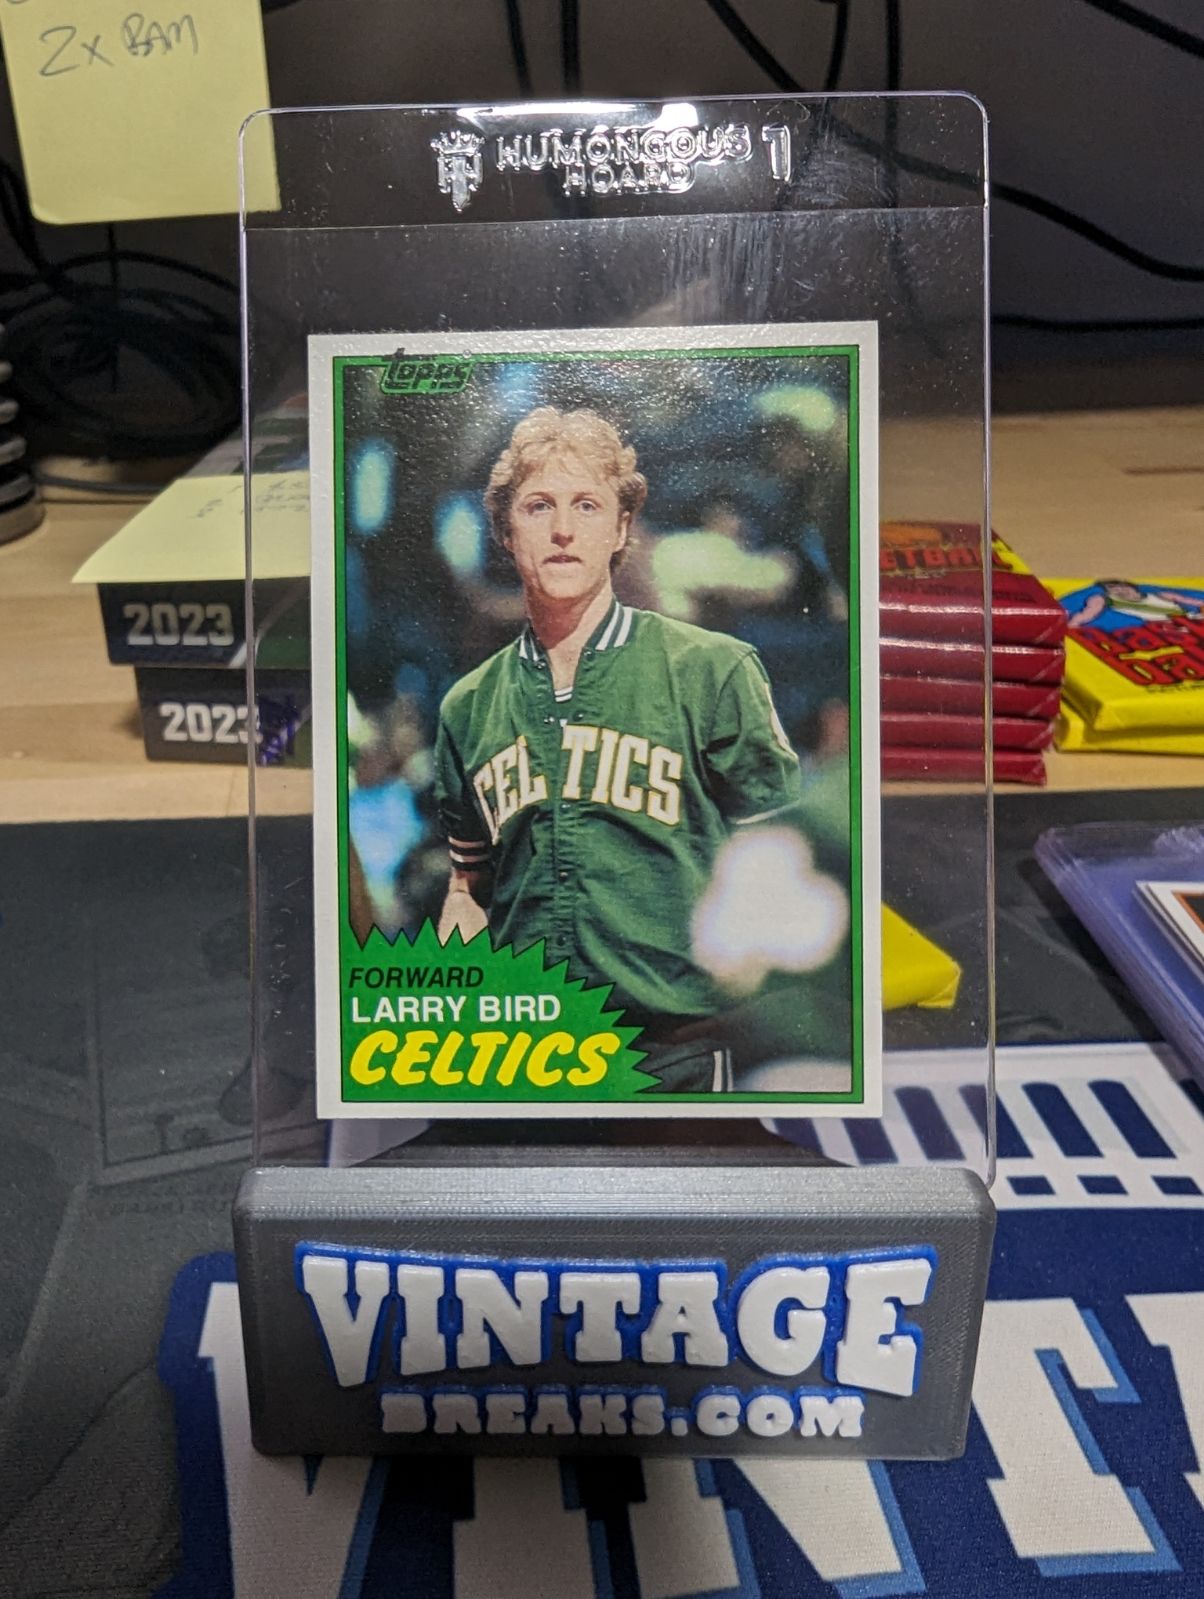 1981 Topps Larry Bird Second Year Card Pulled by Vintage Breaks